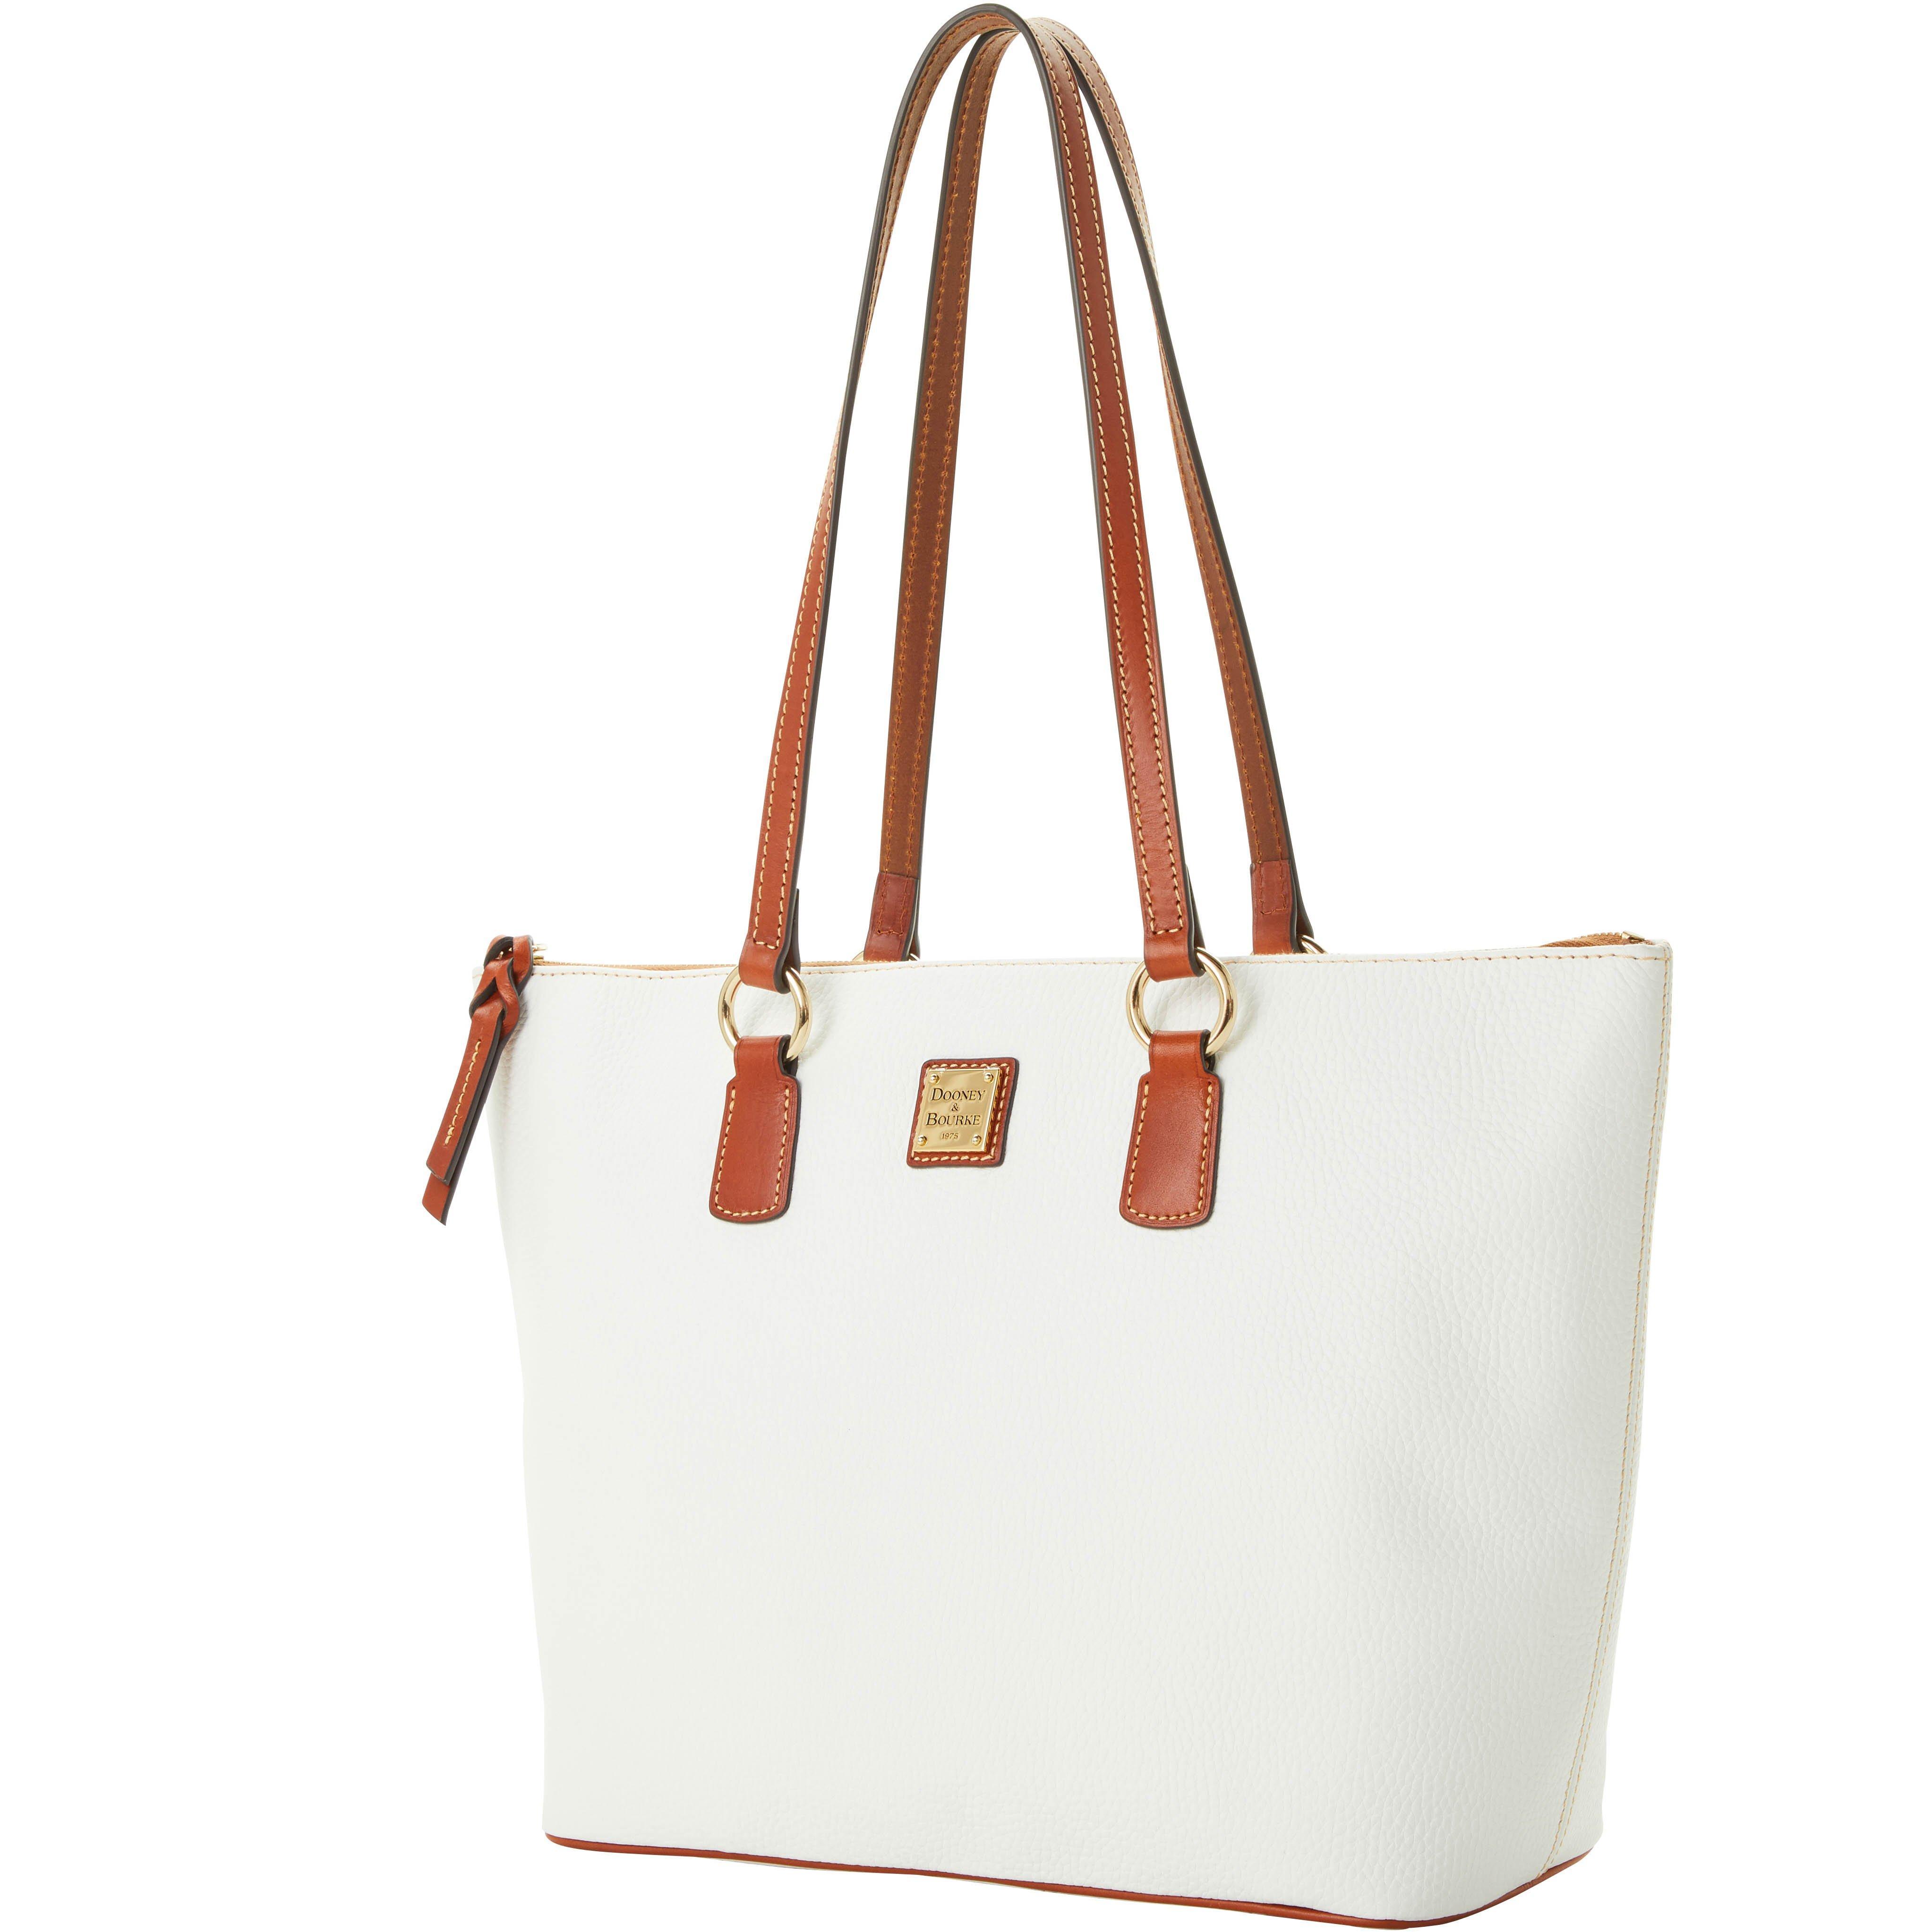 Details about   Dooney & Bourke White Pebble Leather Tote GUC